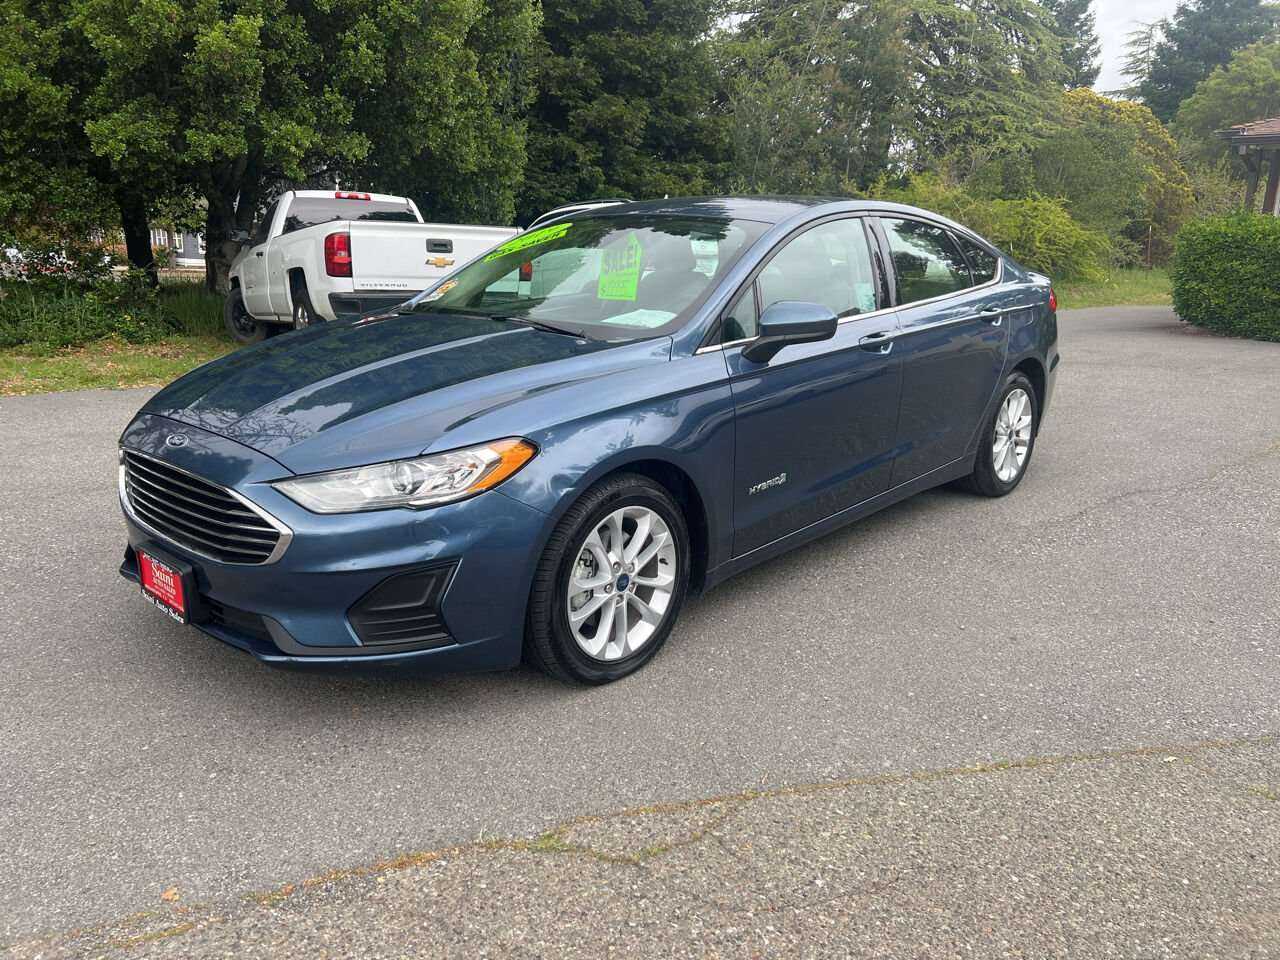 Ford Fusion Hybrid Image 1